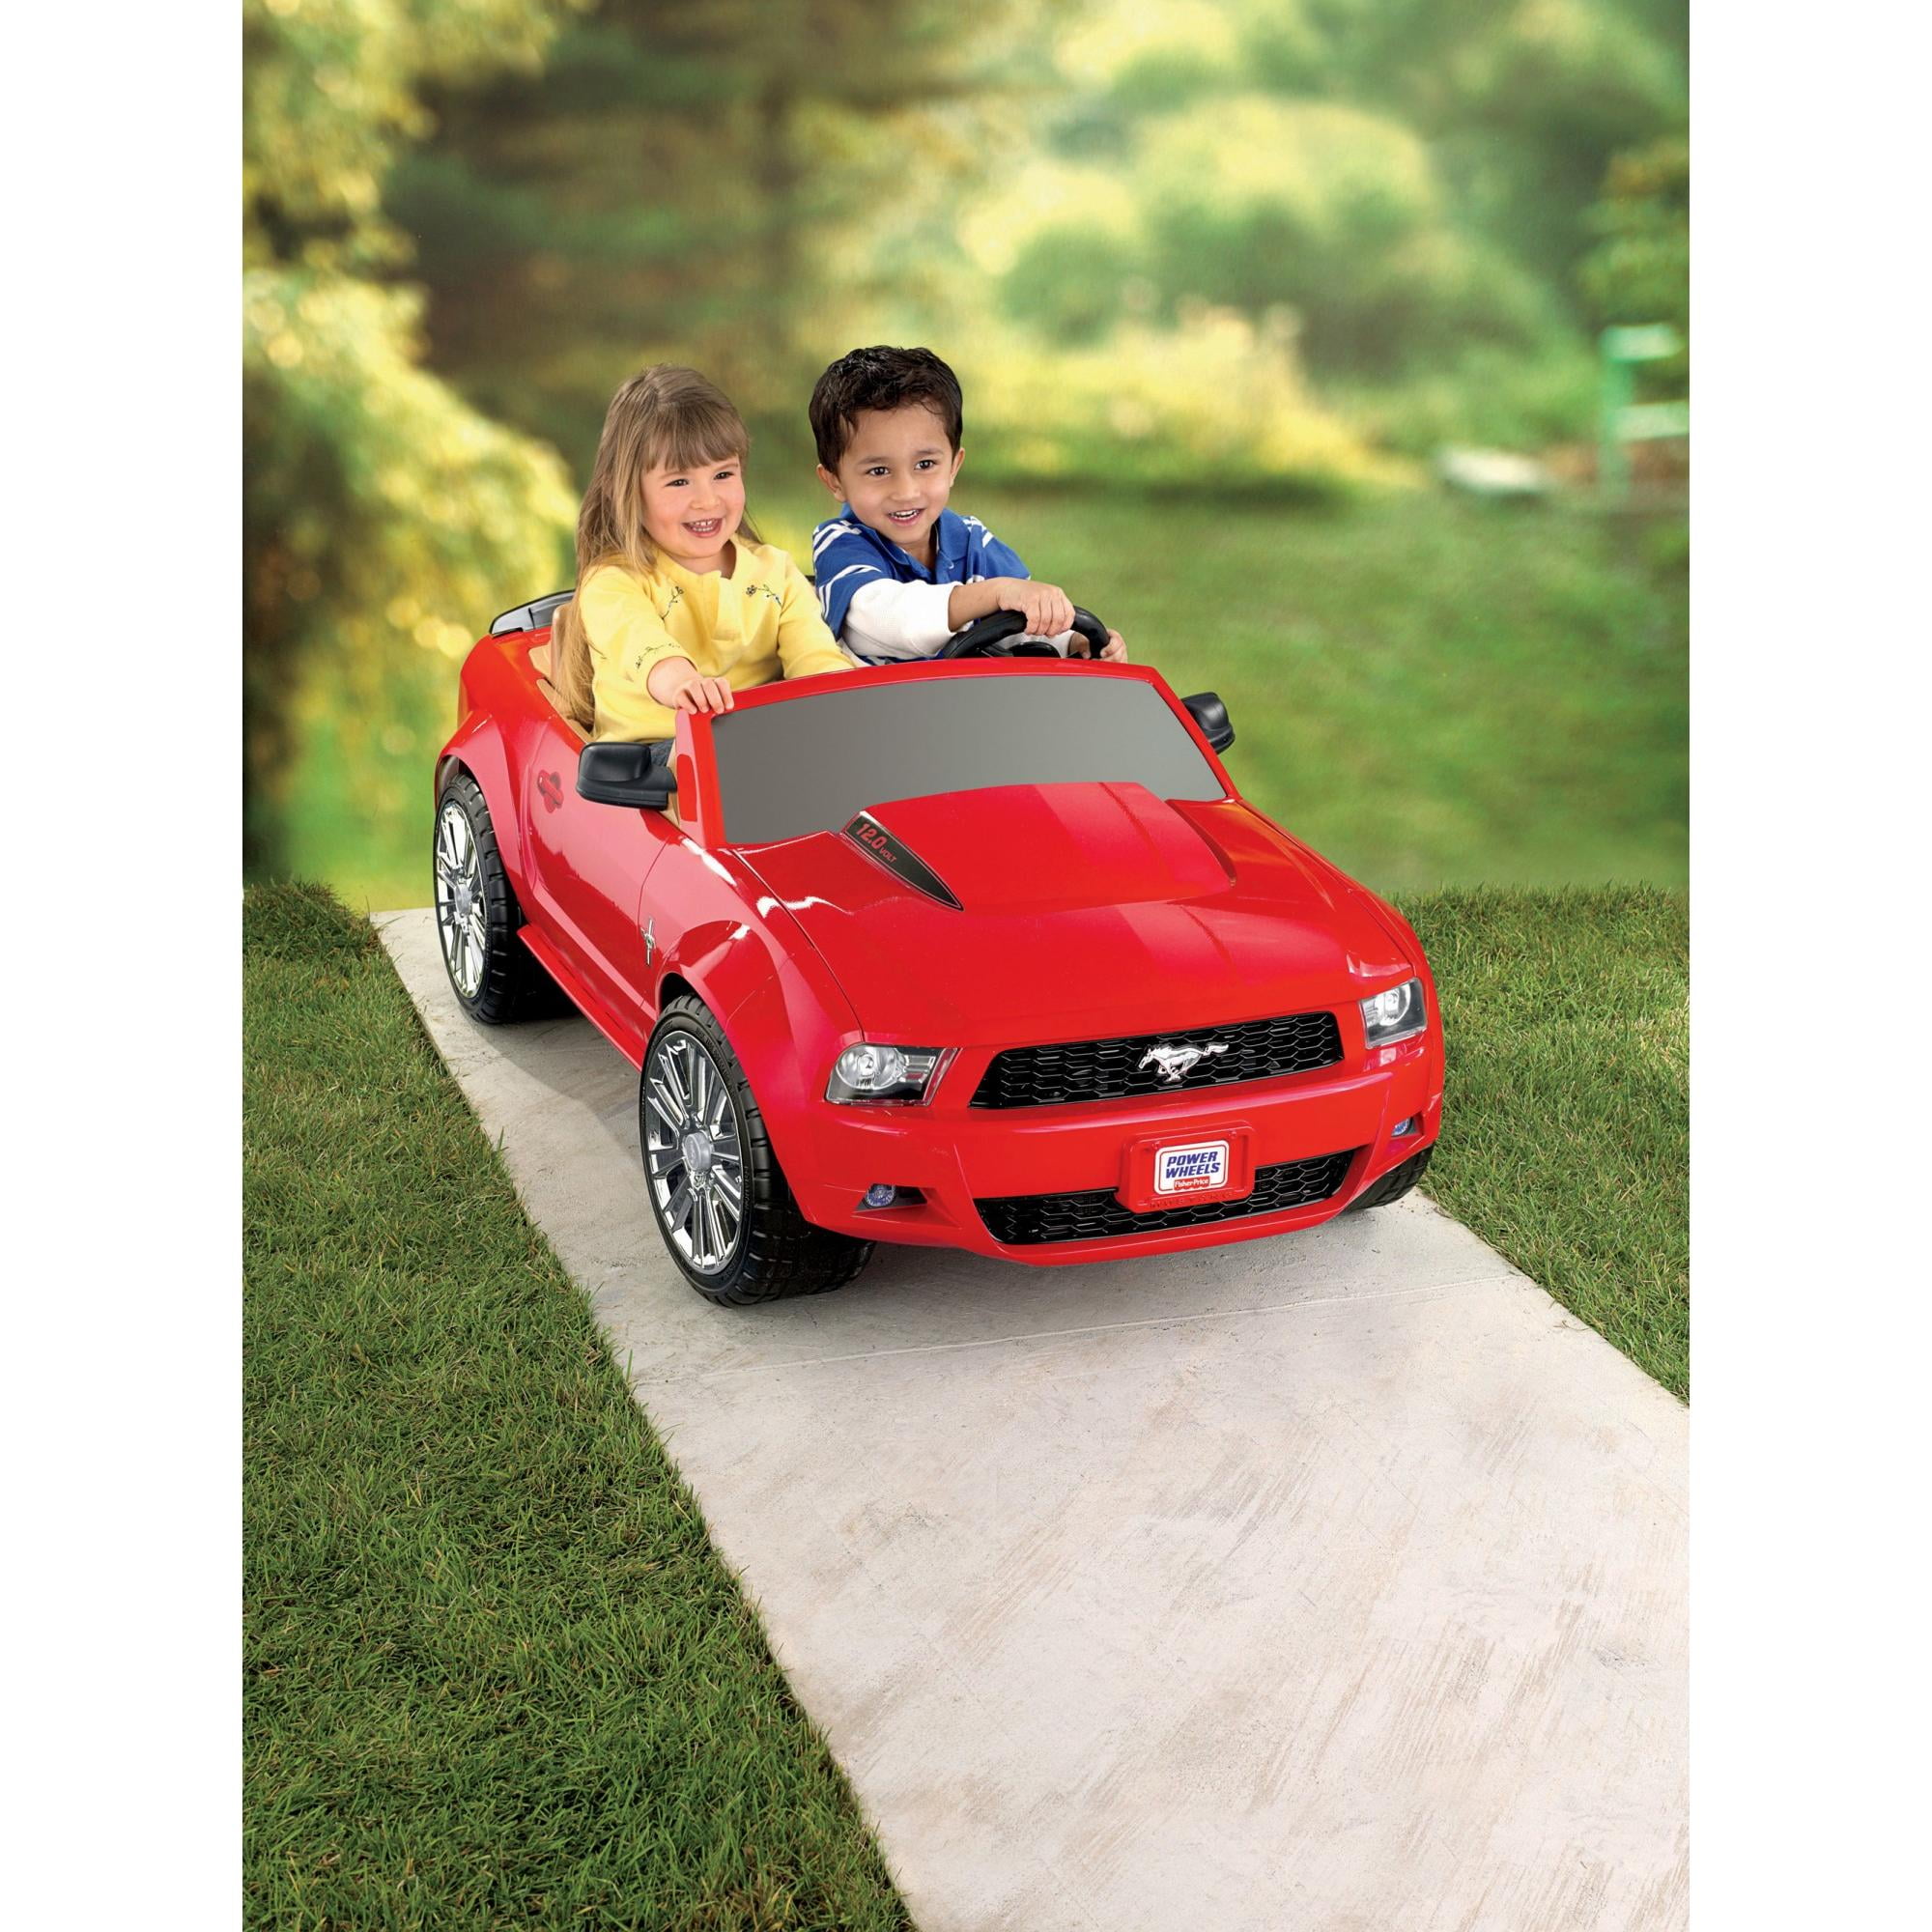 århundrede administration guld Power Wheels Red Ford Mustang 12-Volt Battery-Powered Ride-On - Walmart.com